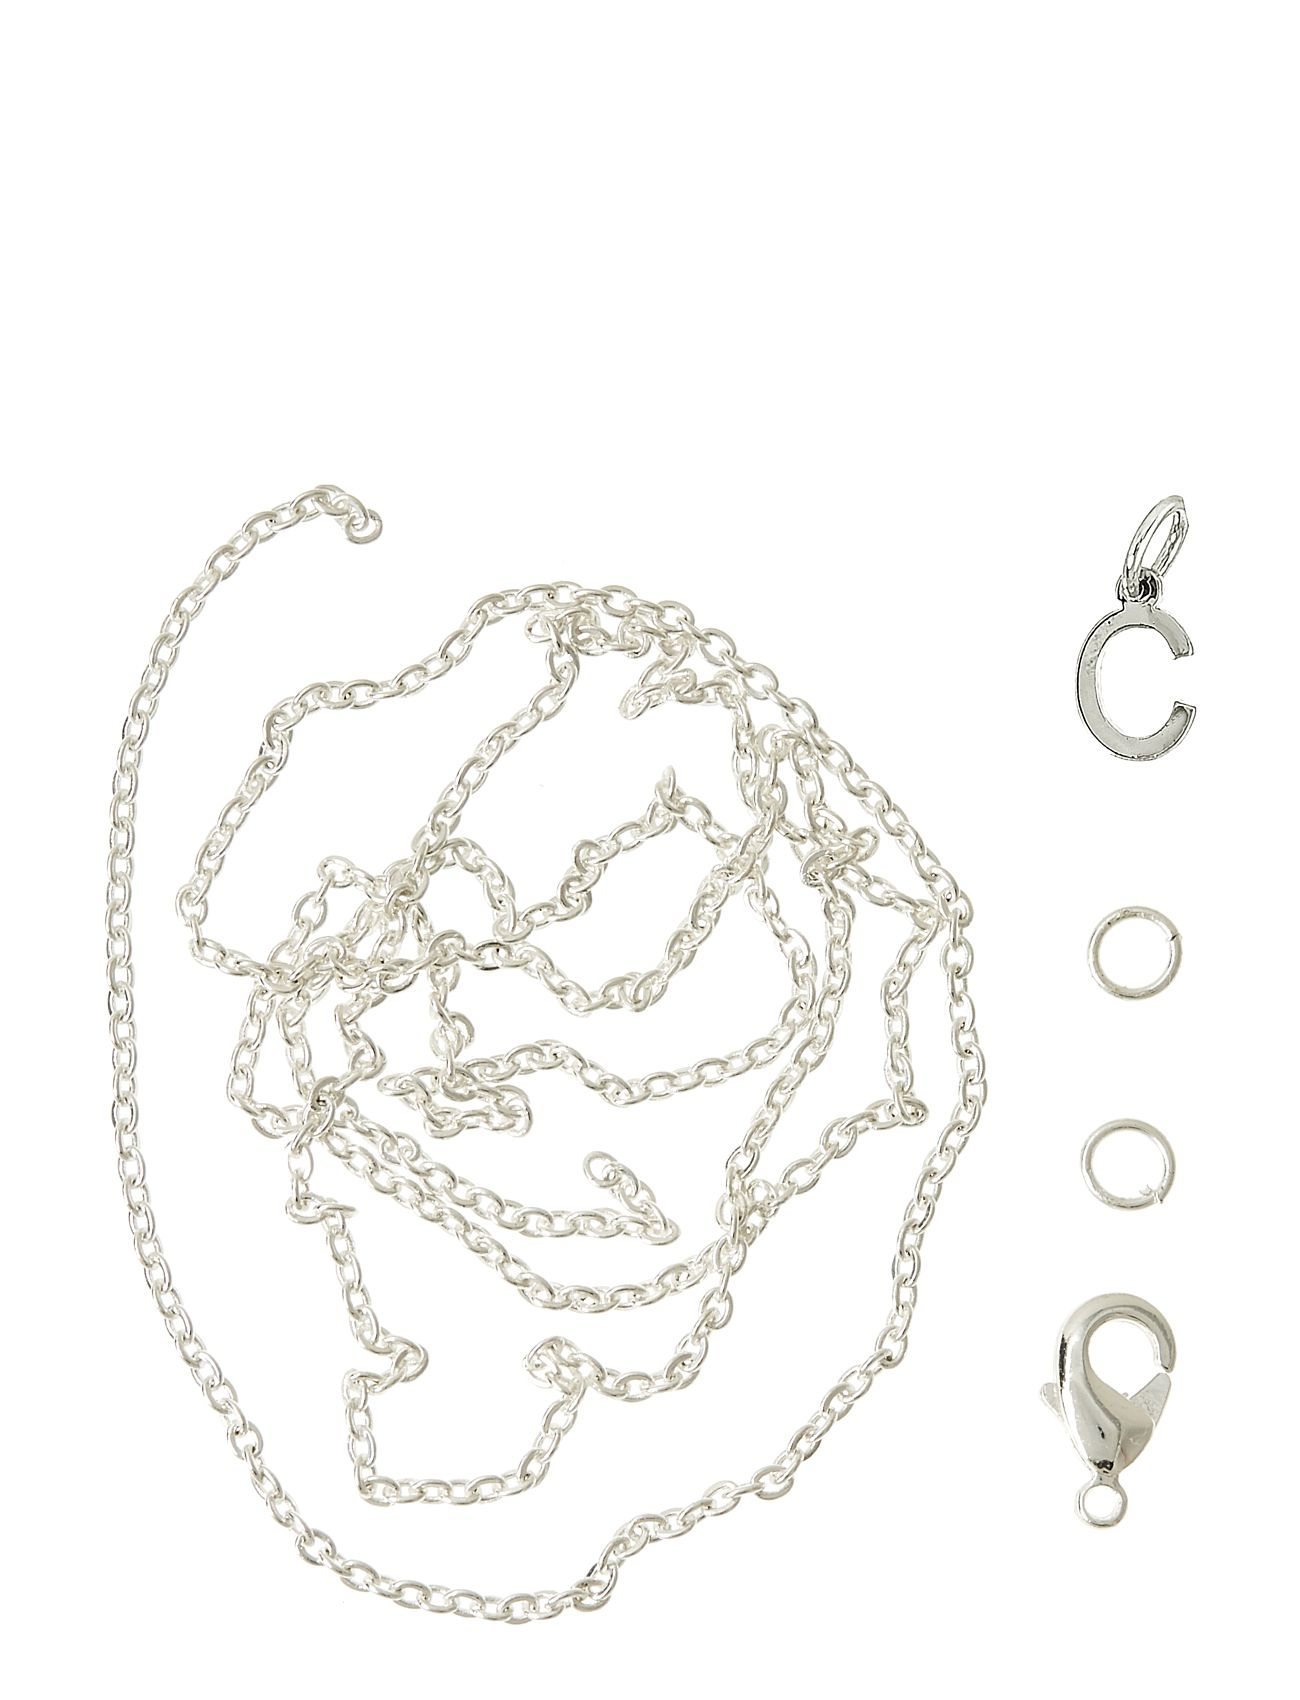 Letter C Sp With O-Ring, Chain And Clasp Toys Creativity Drawing & Crafts Craft Jewellery & Accessories Silver Me & My Box